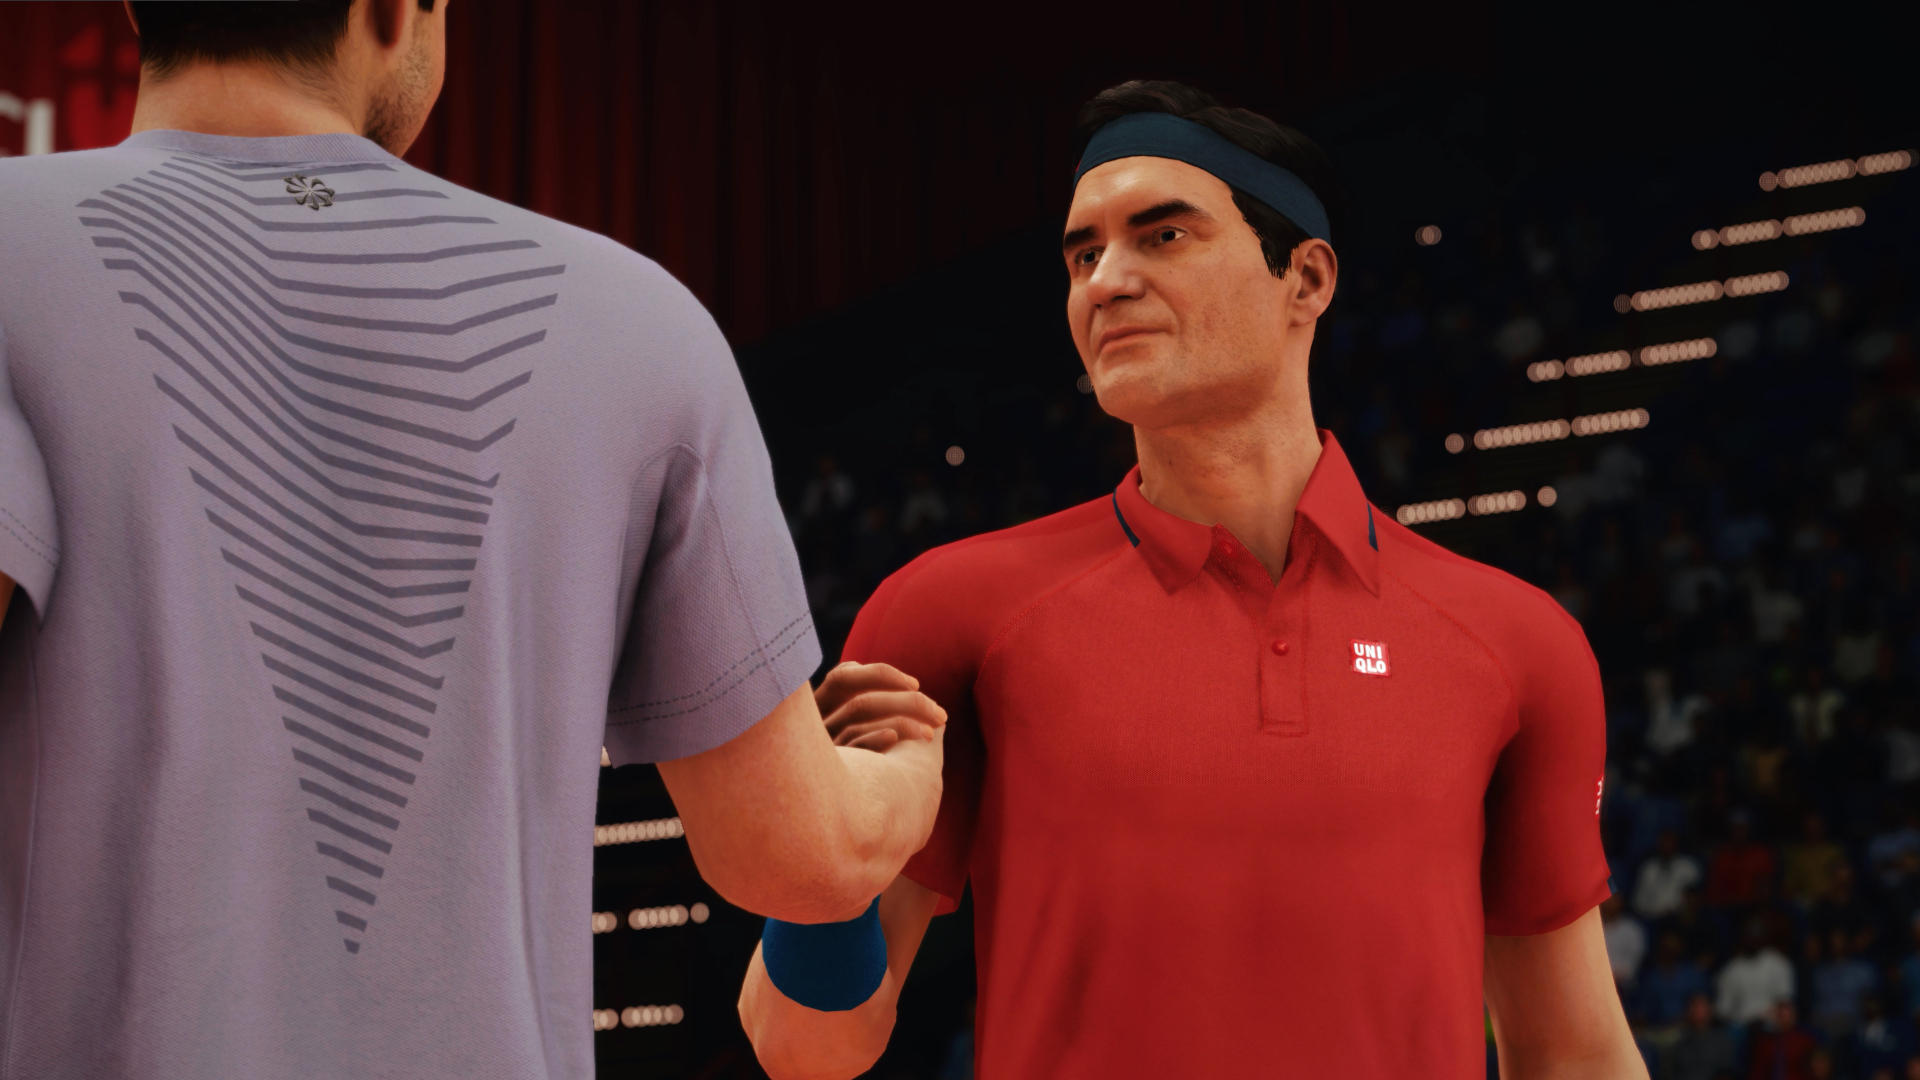 Roger Federer in TopSpin 2K25 shaking hands with Alcarez